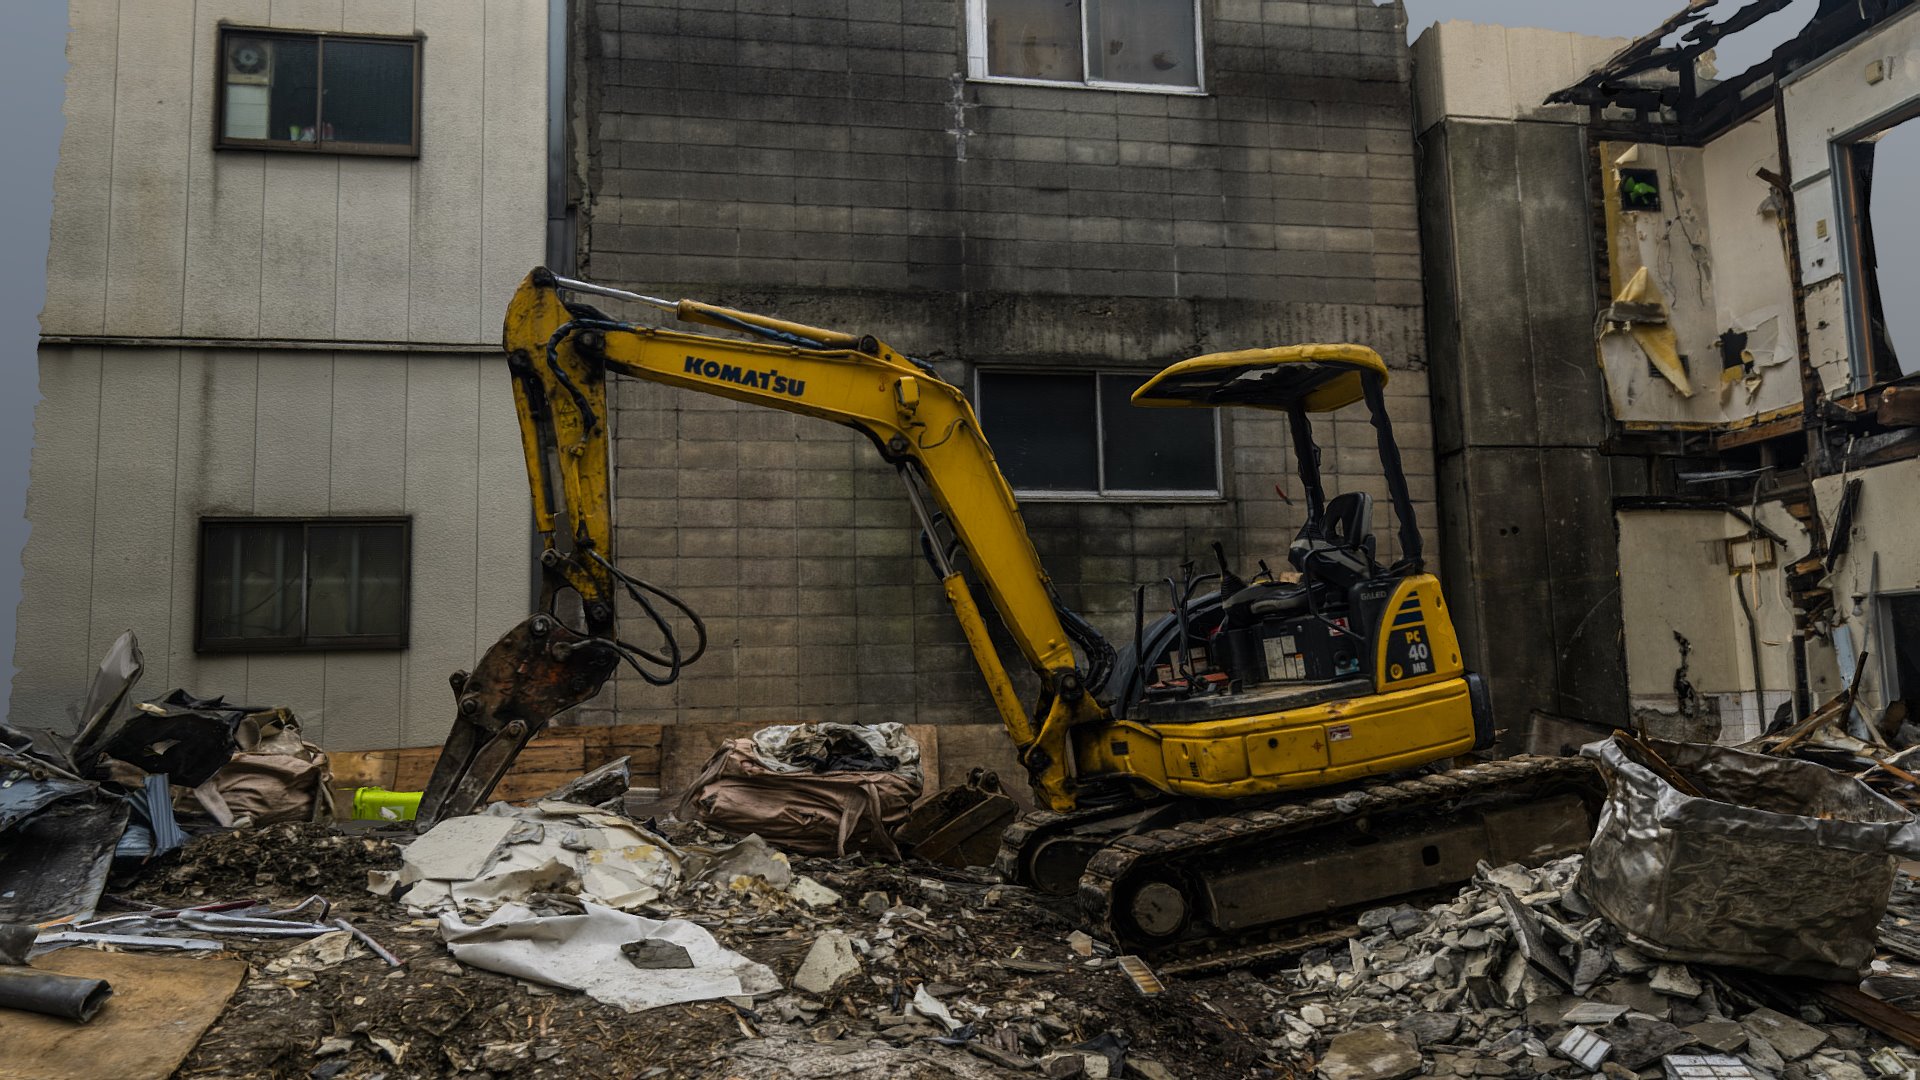 3D model Wrecked house and komatsu excavator scan - This is a 3D model of the Wrecked house and komatsu excavator scan. The 3D model is about a yellow and black forklift in a demolished building.